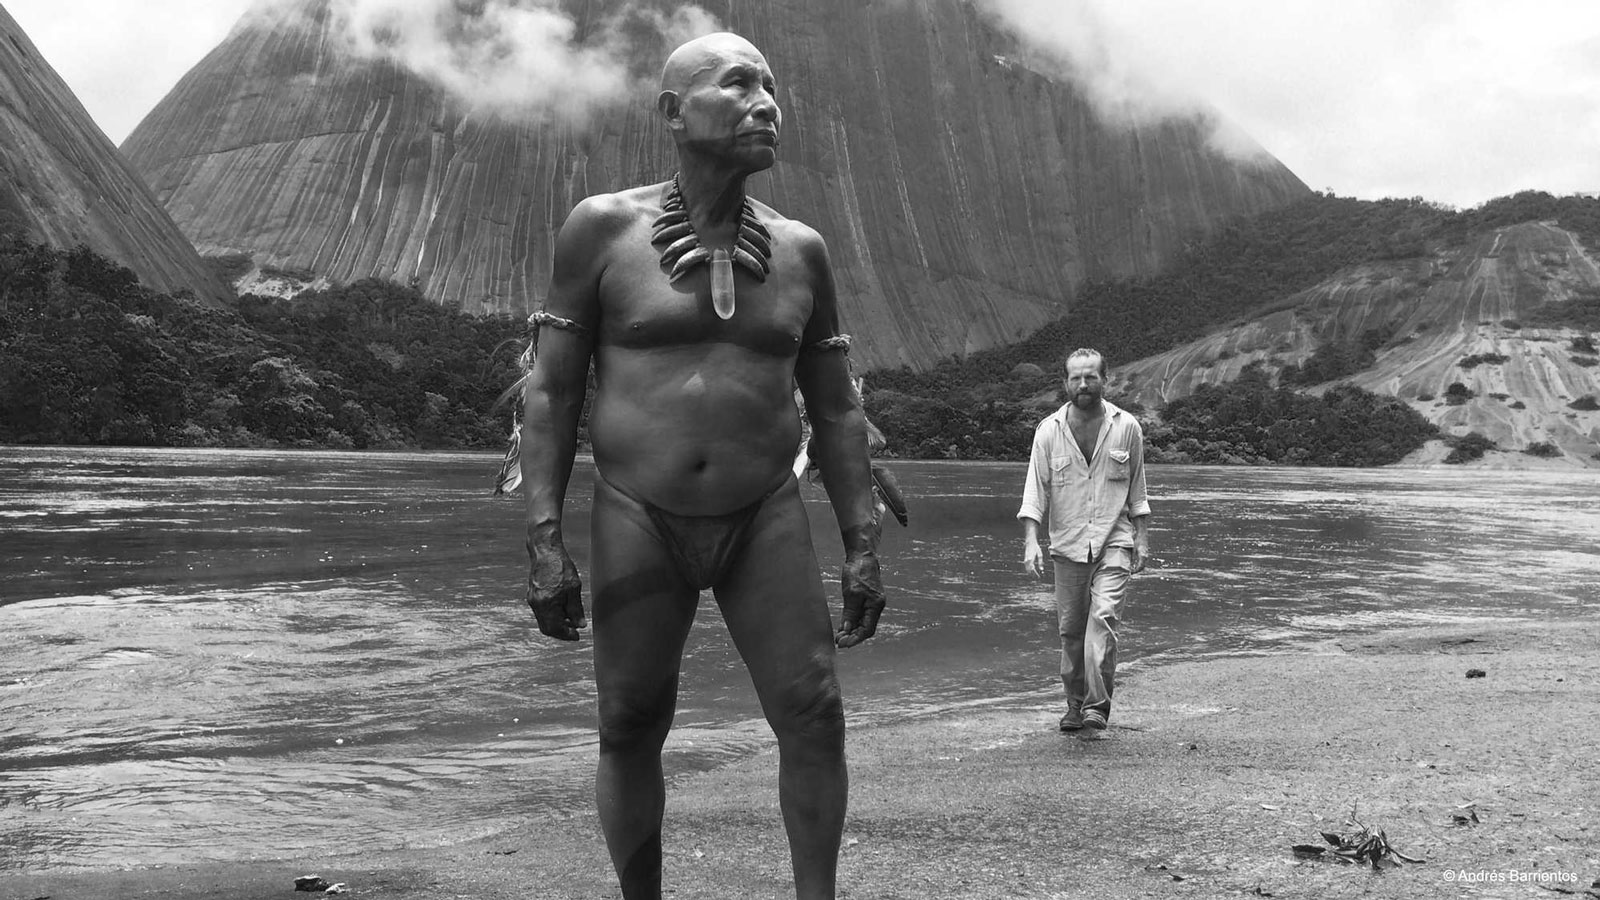 Antonio Bolivar as Karamakate and Brionne Davis as Richard Evans Schultes in Ciro Guerra’s Embrace of the Serpent, 2015